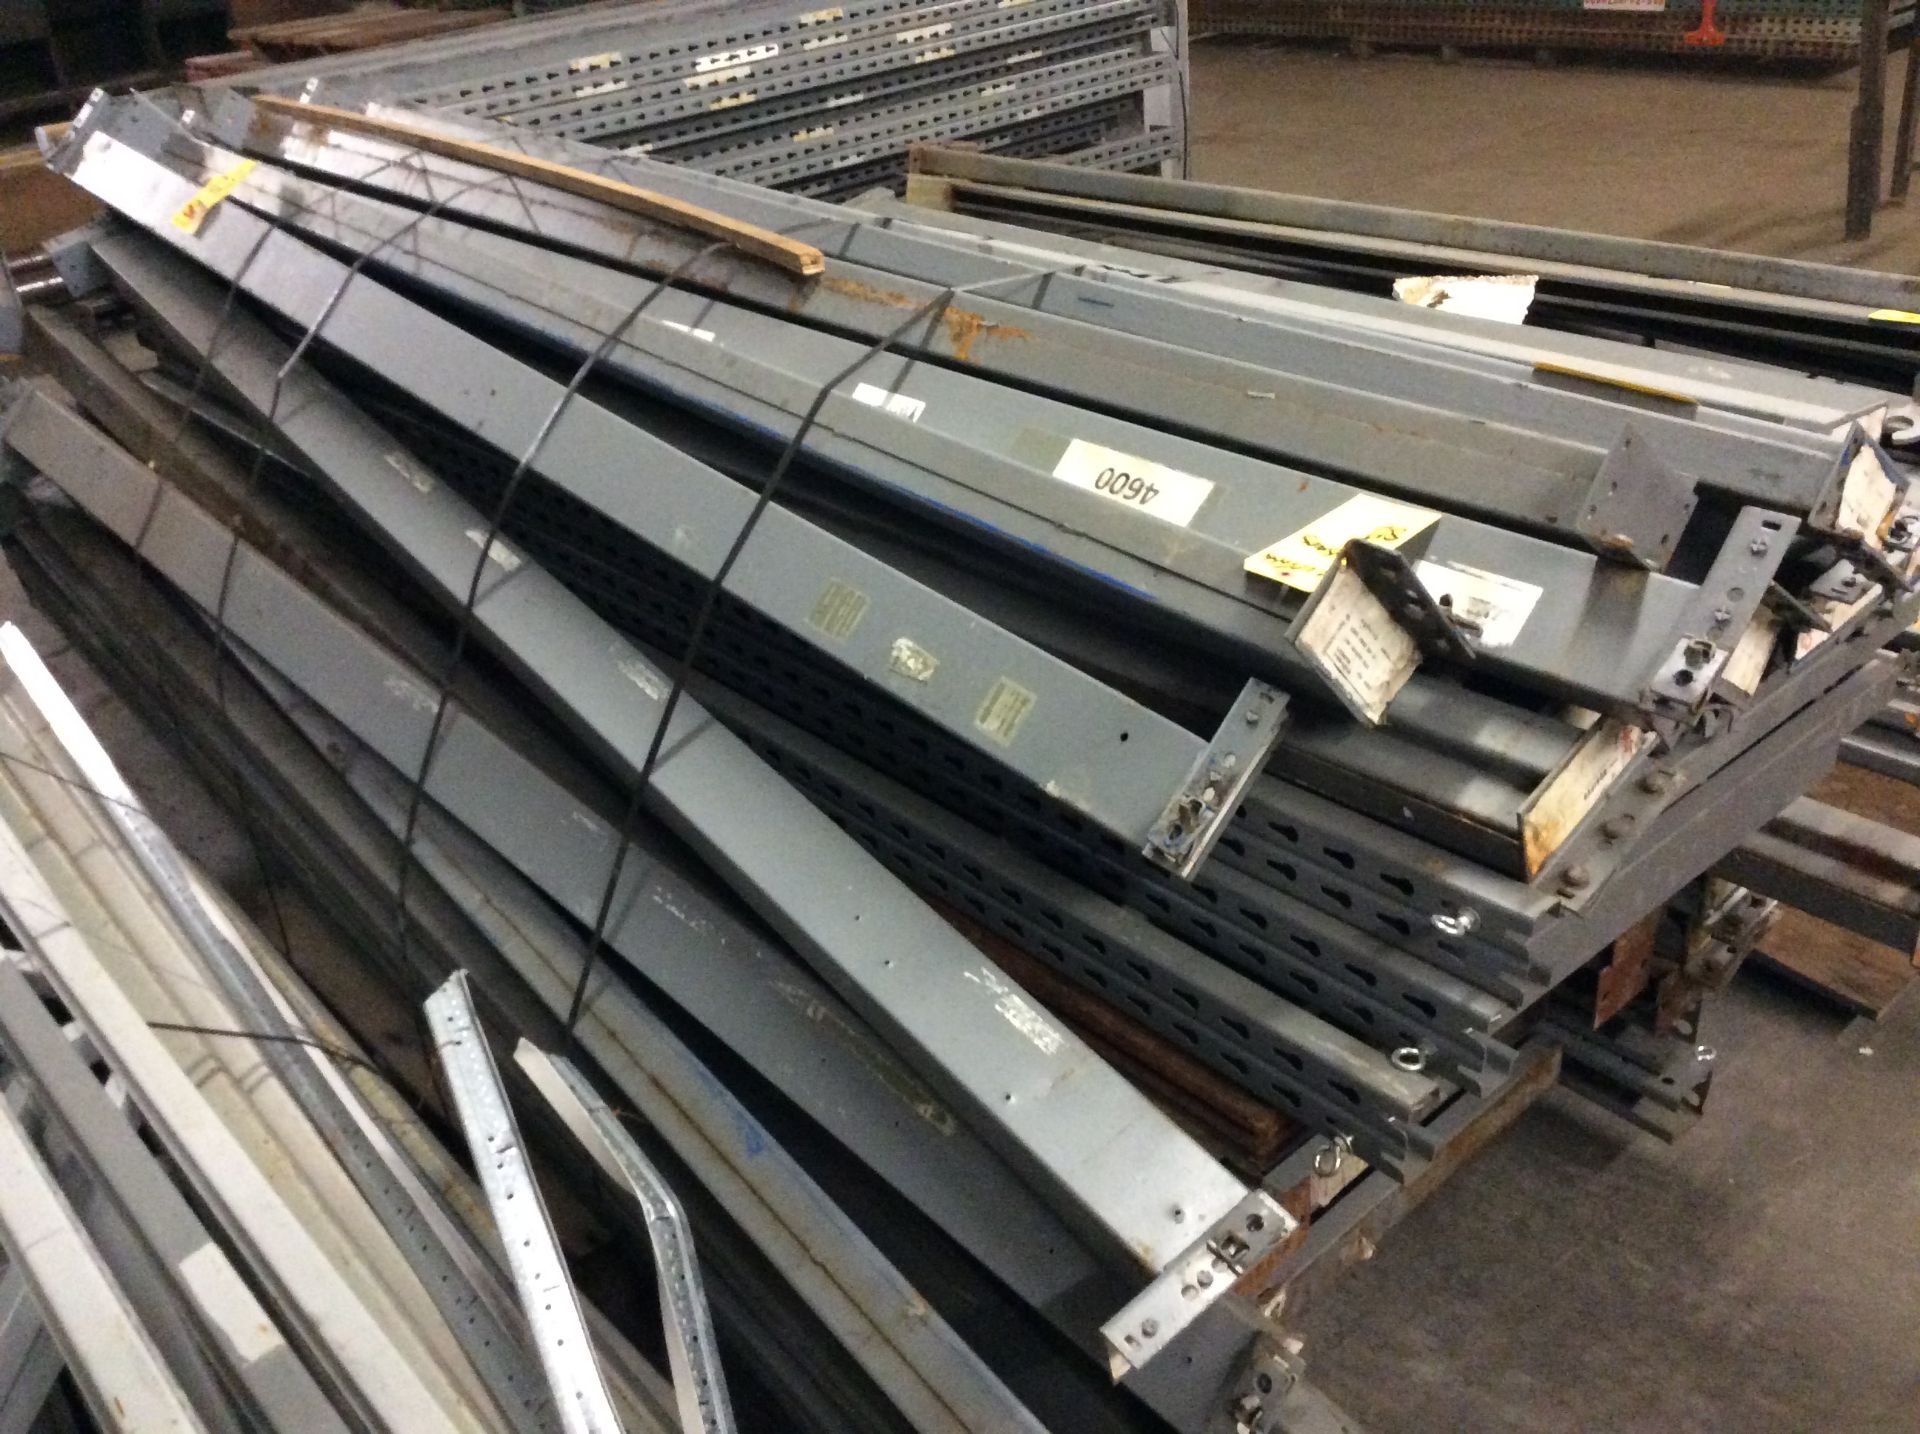 Lot, Pallet Racking, Disassembled, (19) Uprights 10 Ft. X 27 In. Depth, (17) Uprights 8 Ft. X 27 In. - Image 2 of 6